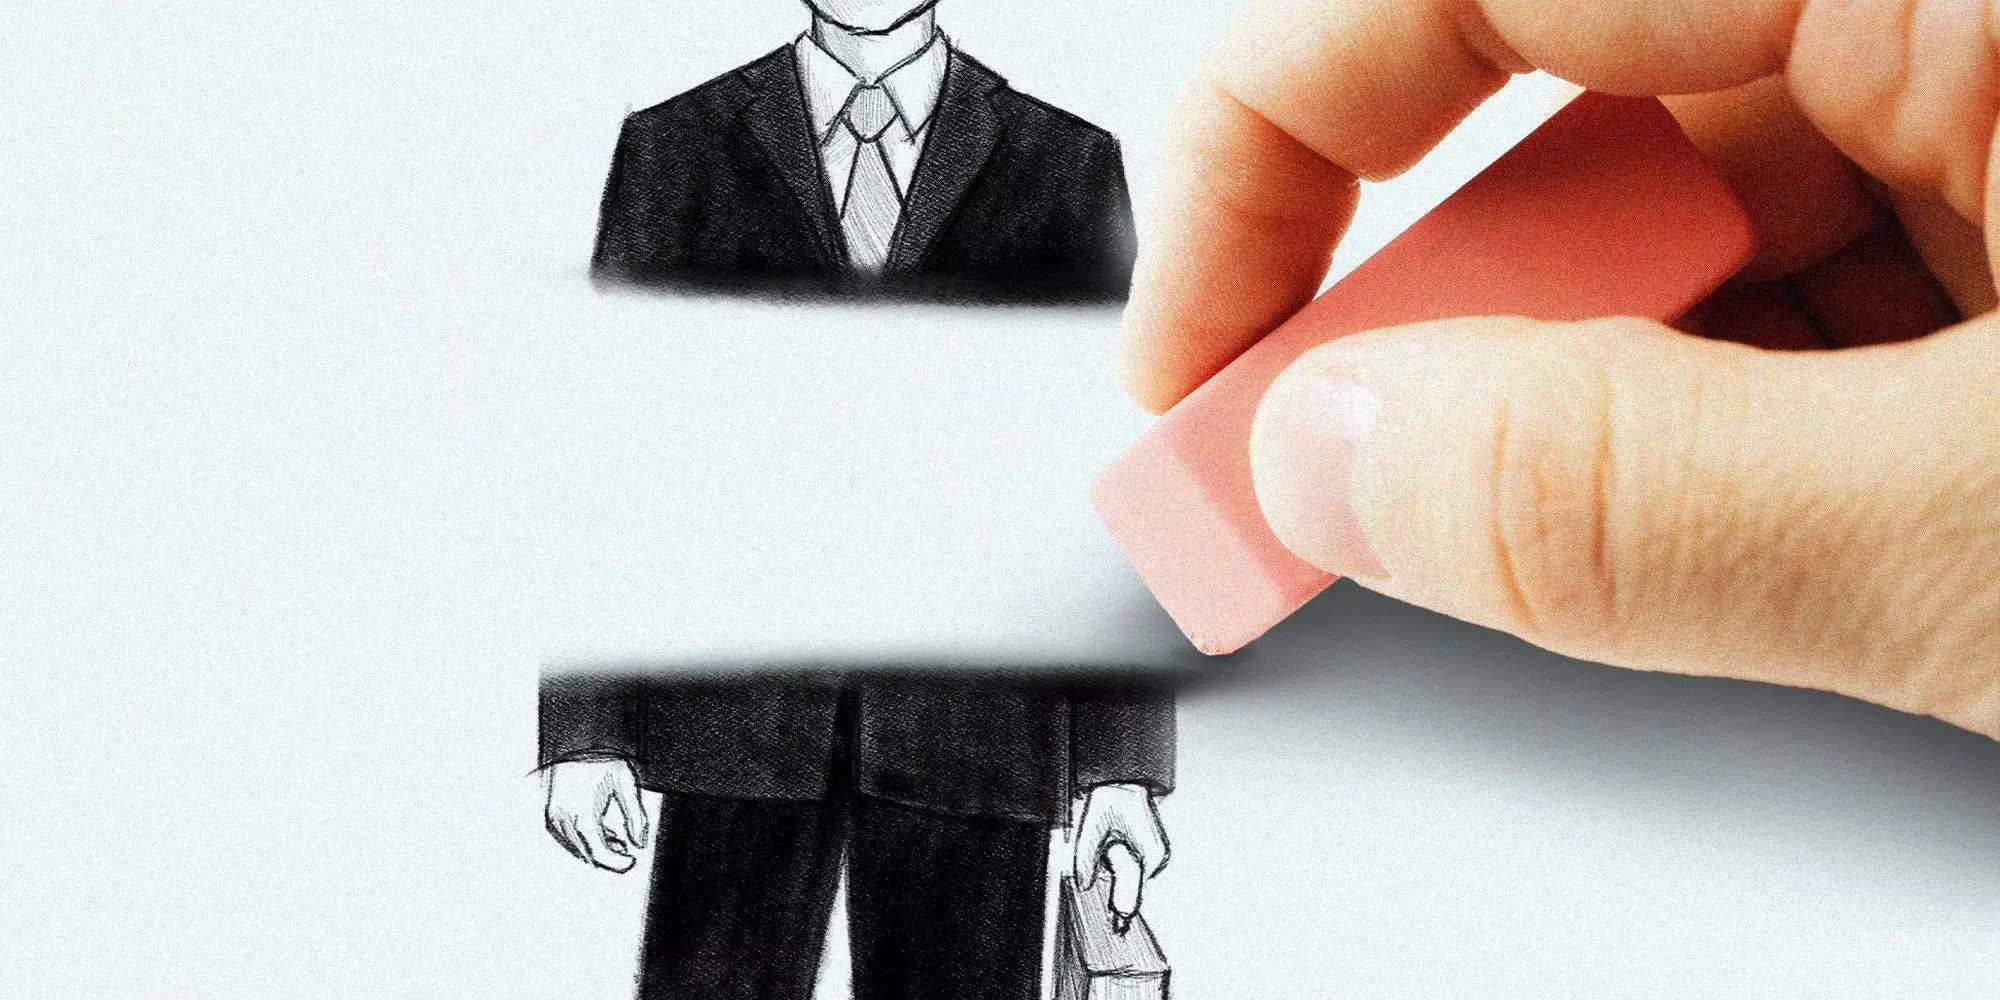 Eraser erasing a drawing of a person in a suit